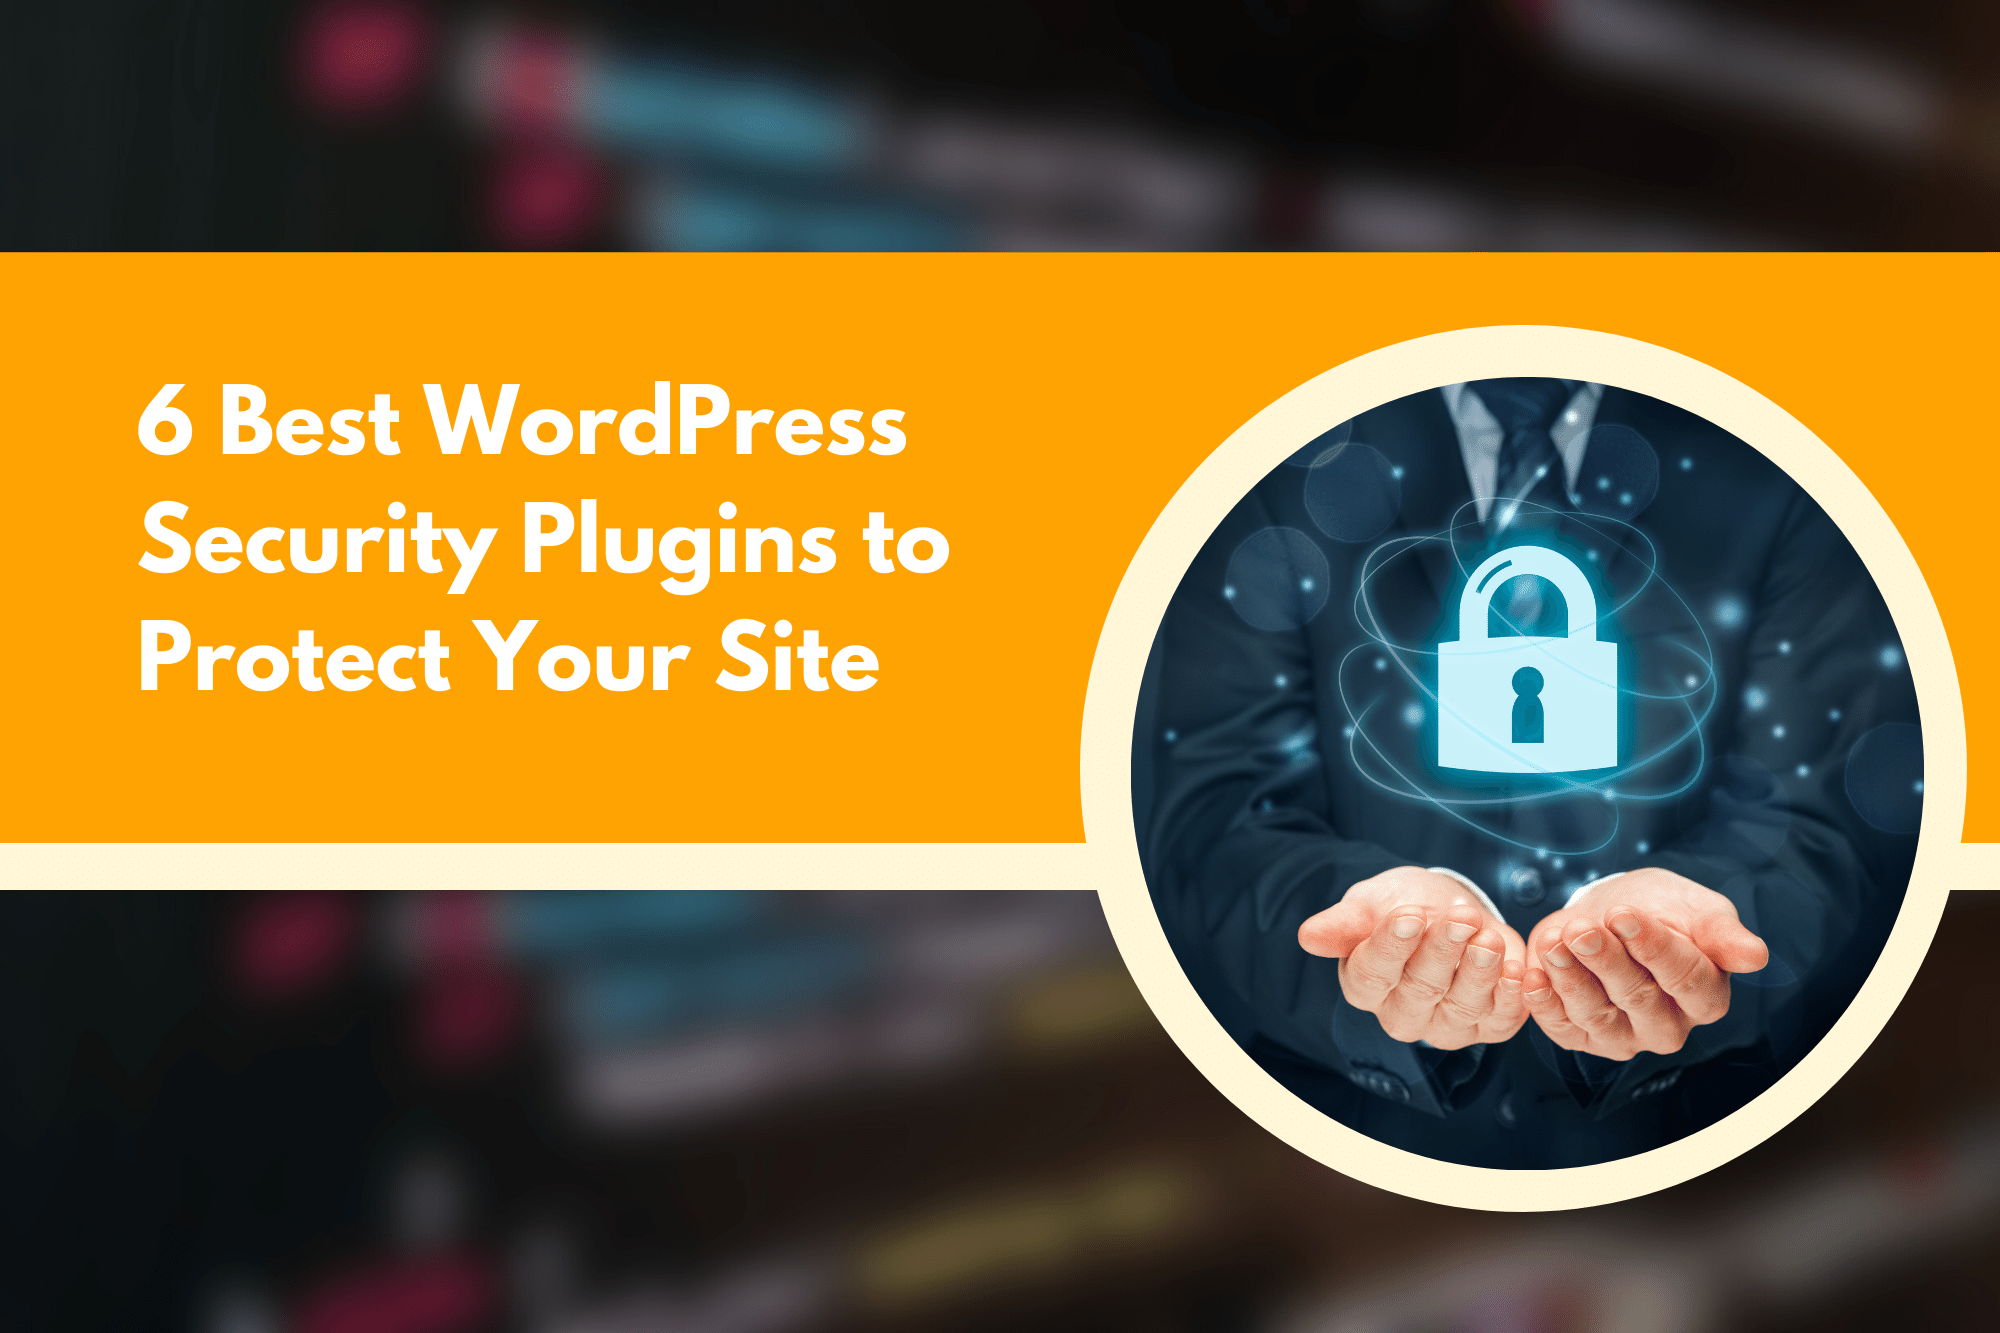 6 Best WordPress Security Plugins to Protect Your Site